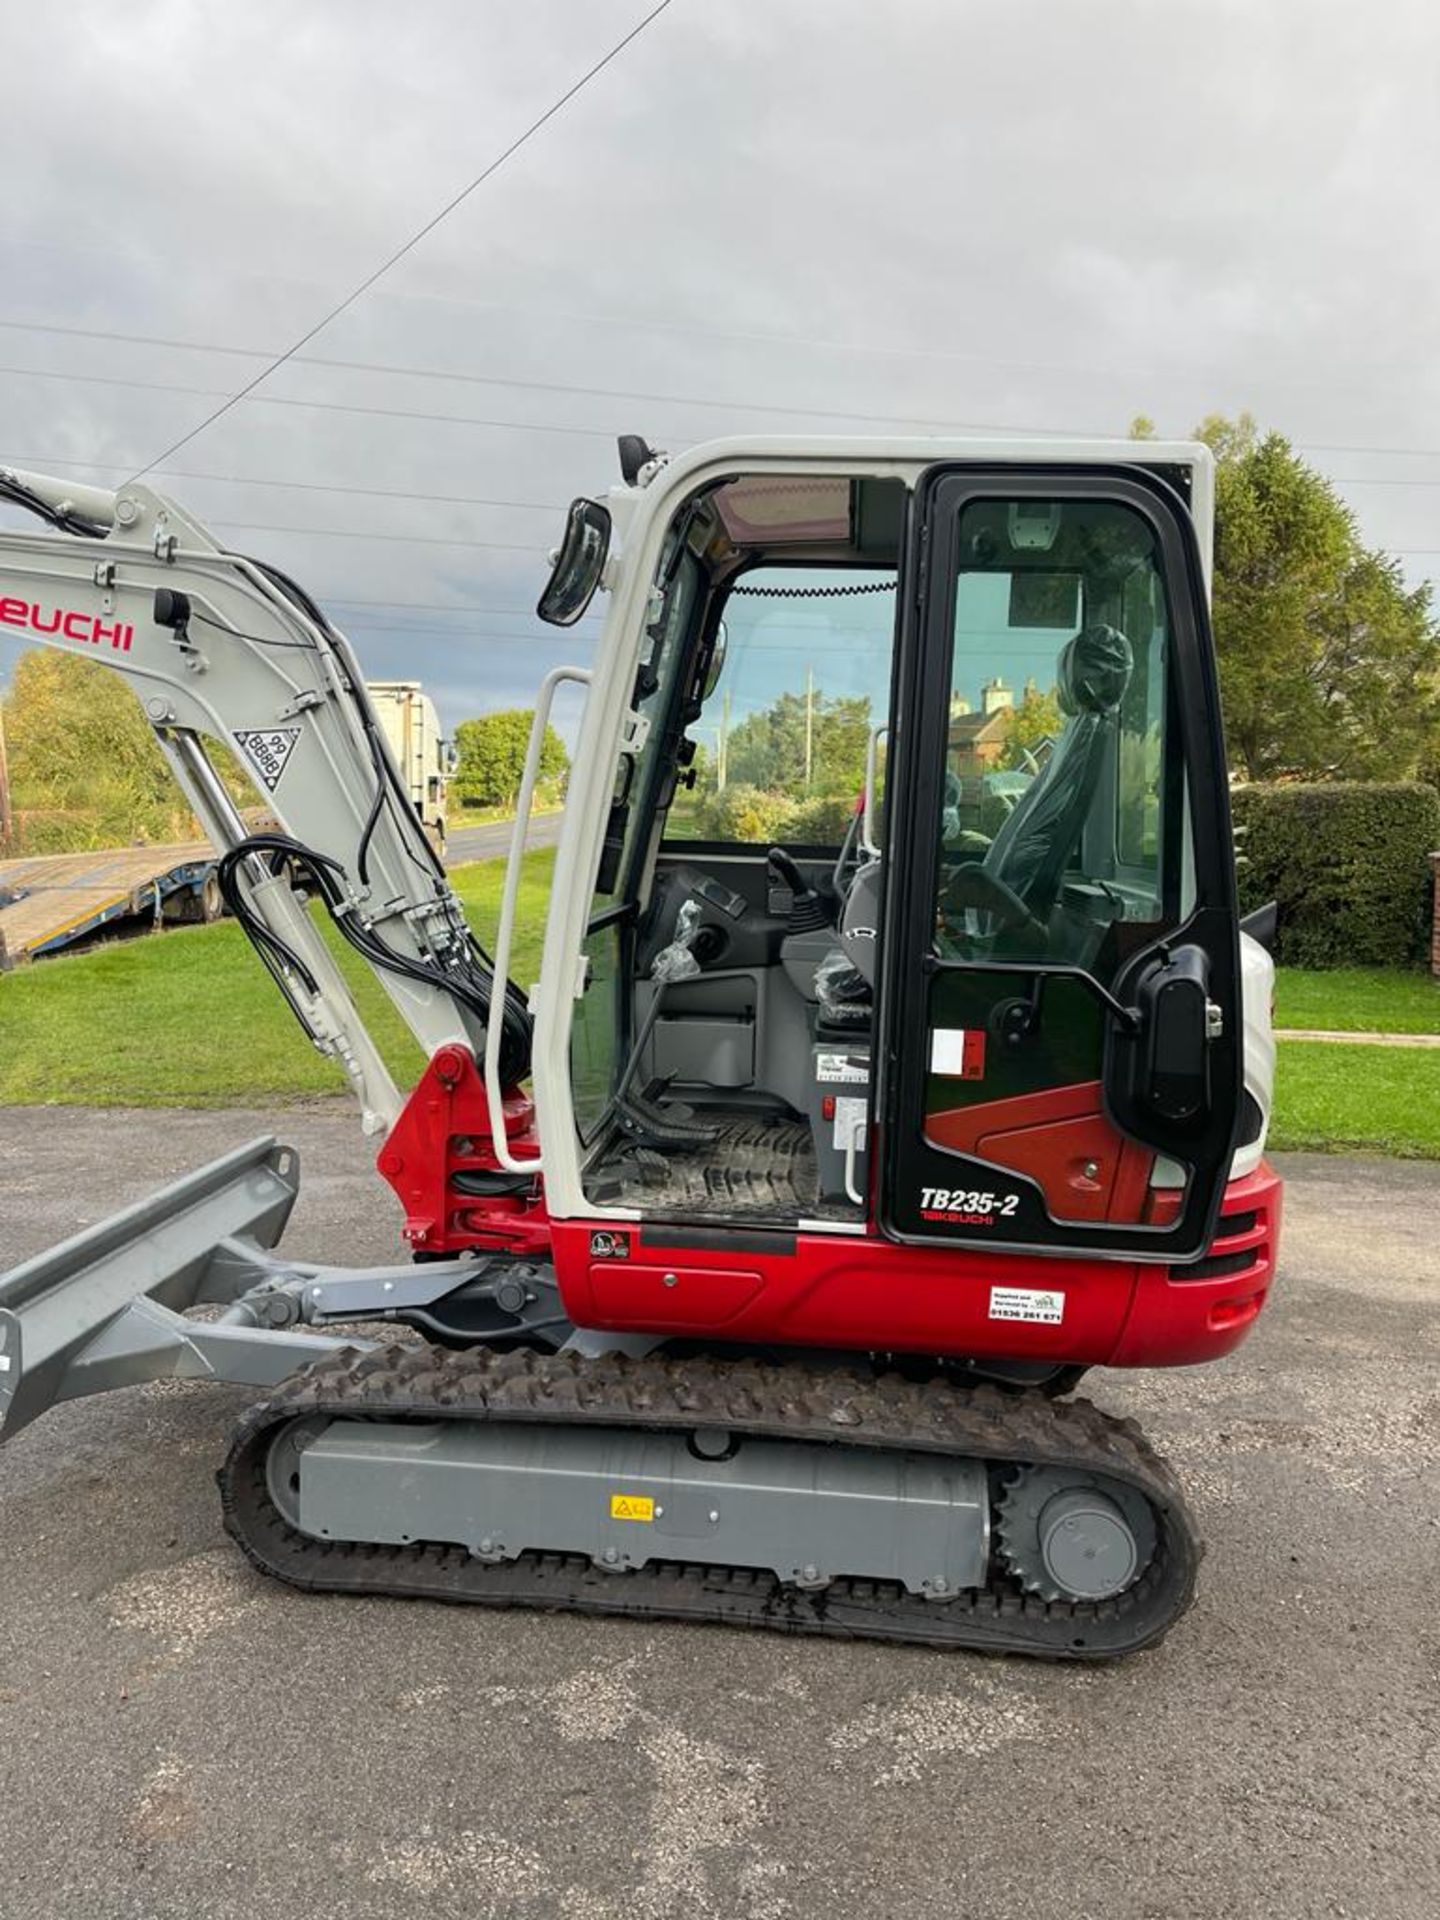 2021 ONLY 60 hrs ! Takeushi TB235 -2 3.5 Ton Excavator HYD QUICK HITCH *PLUS VAT* - Image 4 of 5